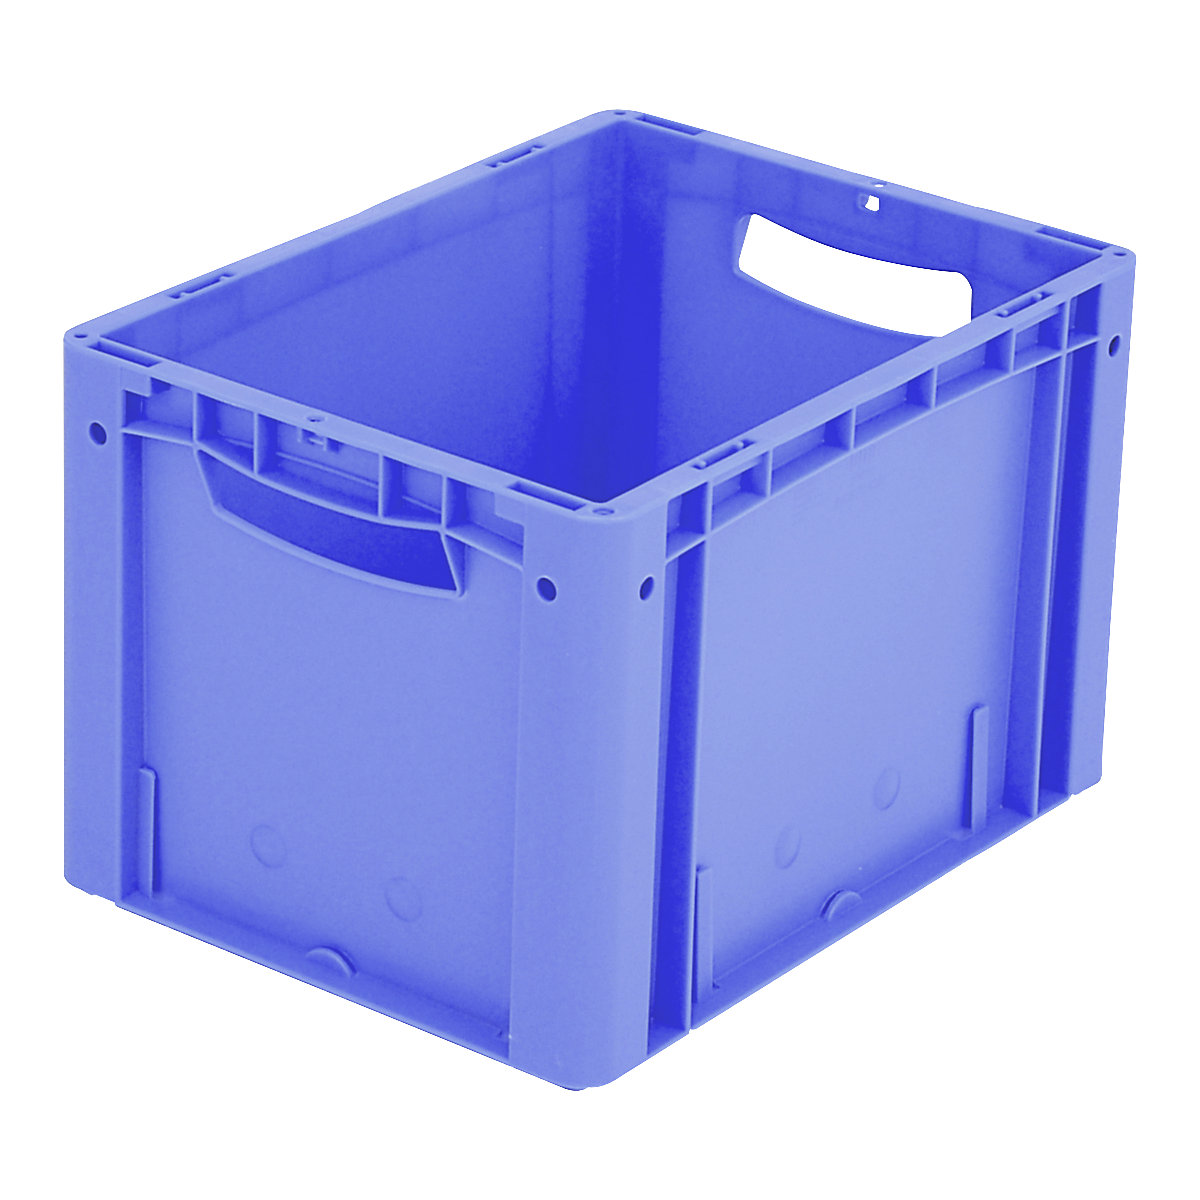 XL Euro stacking container – BITO, standard model, LxWxH 400 x 300 x 270 mm-6